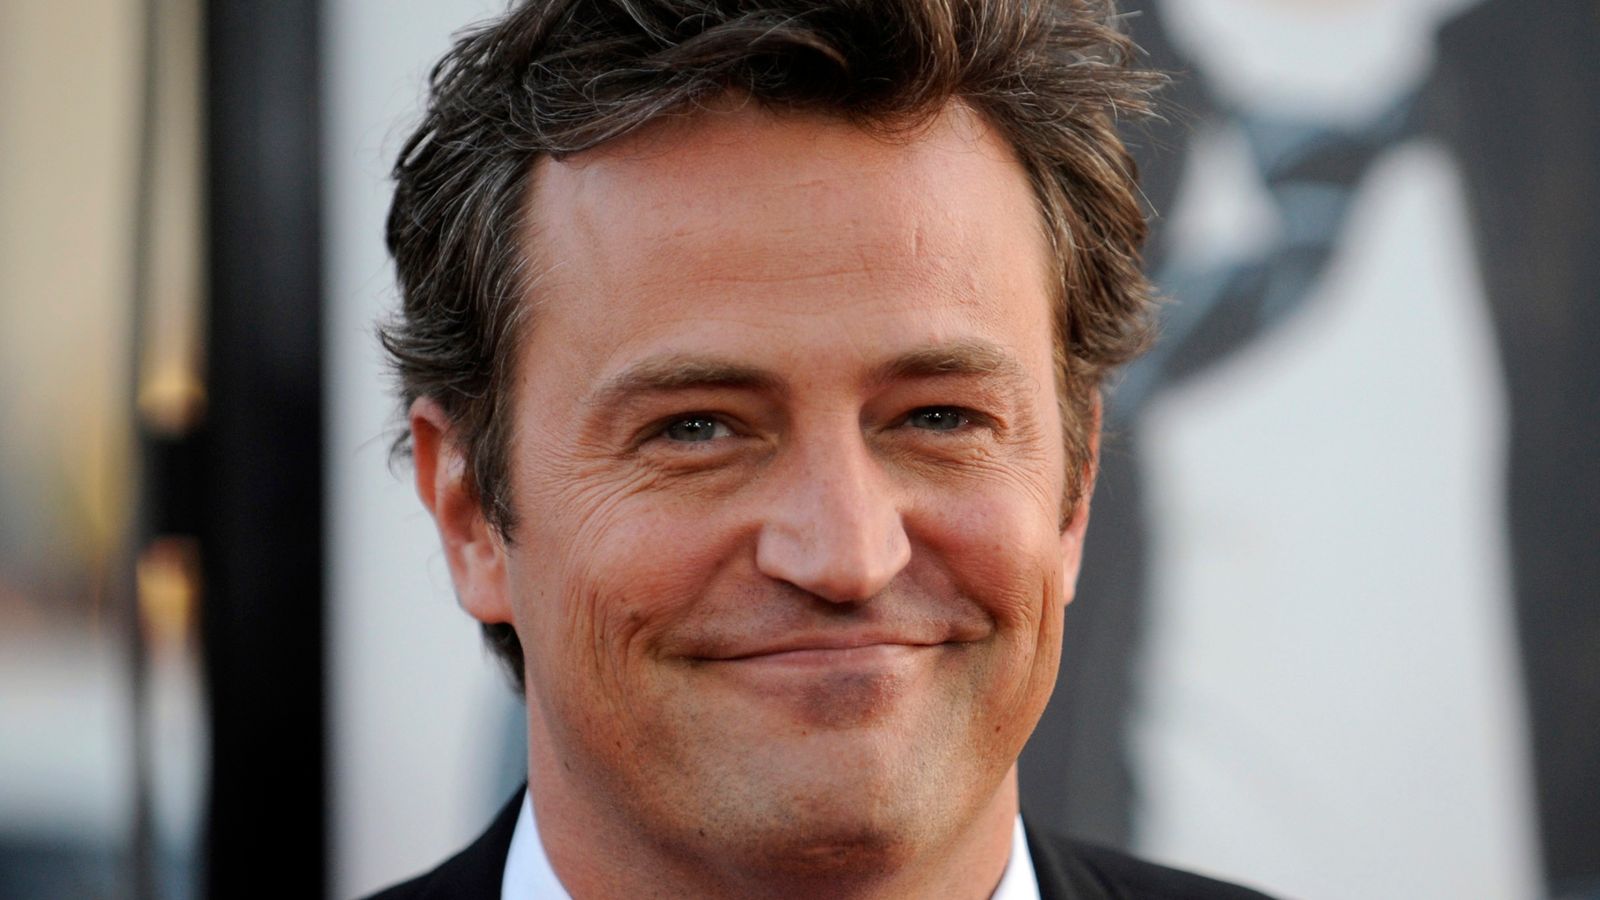 Friends star Matthew Perry's death was accidental from 'acute effects of ketamine', Los Angeles officials say